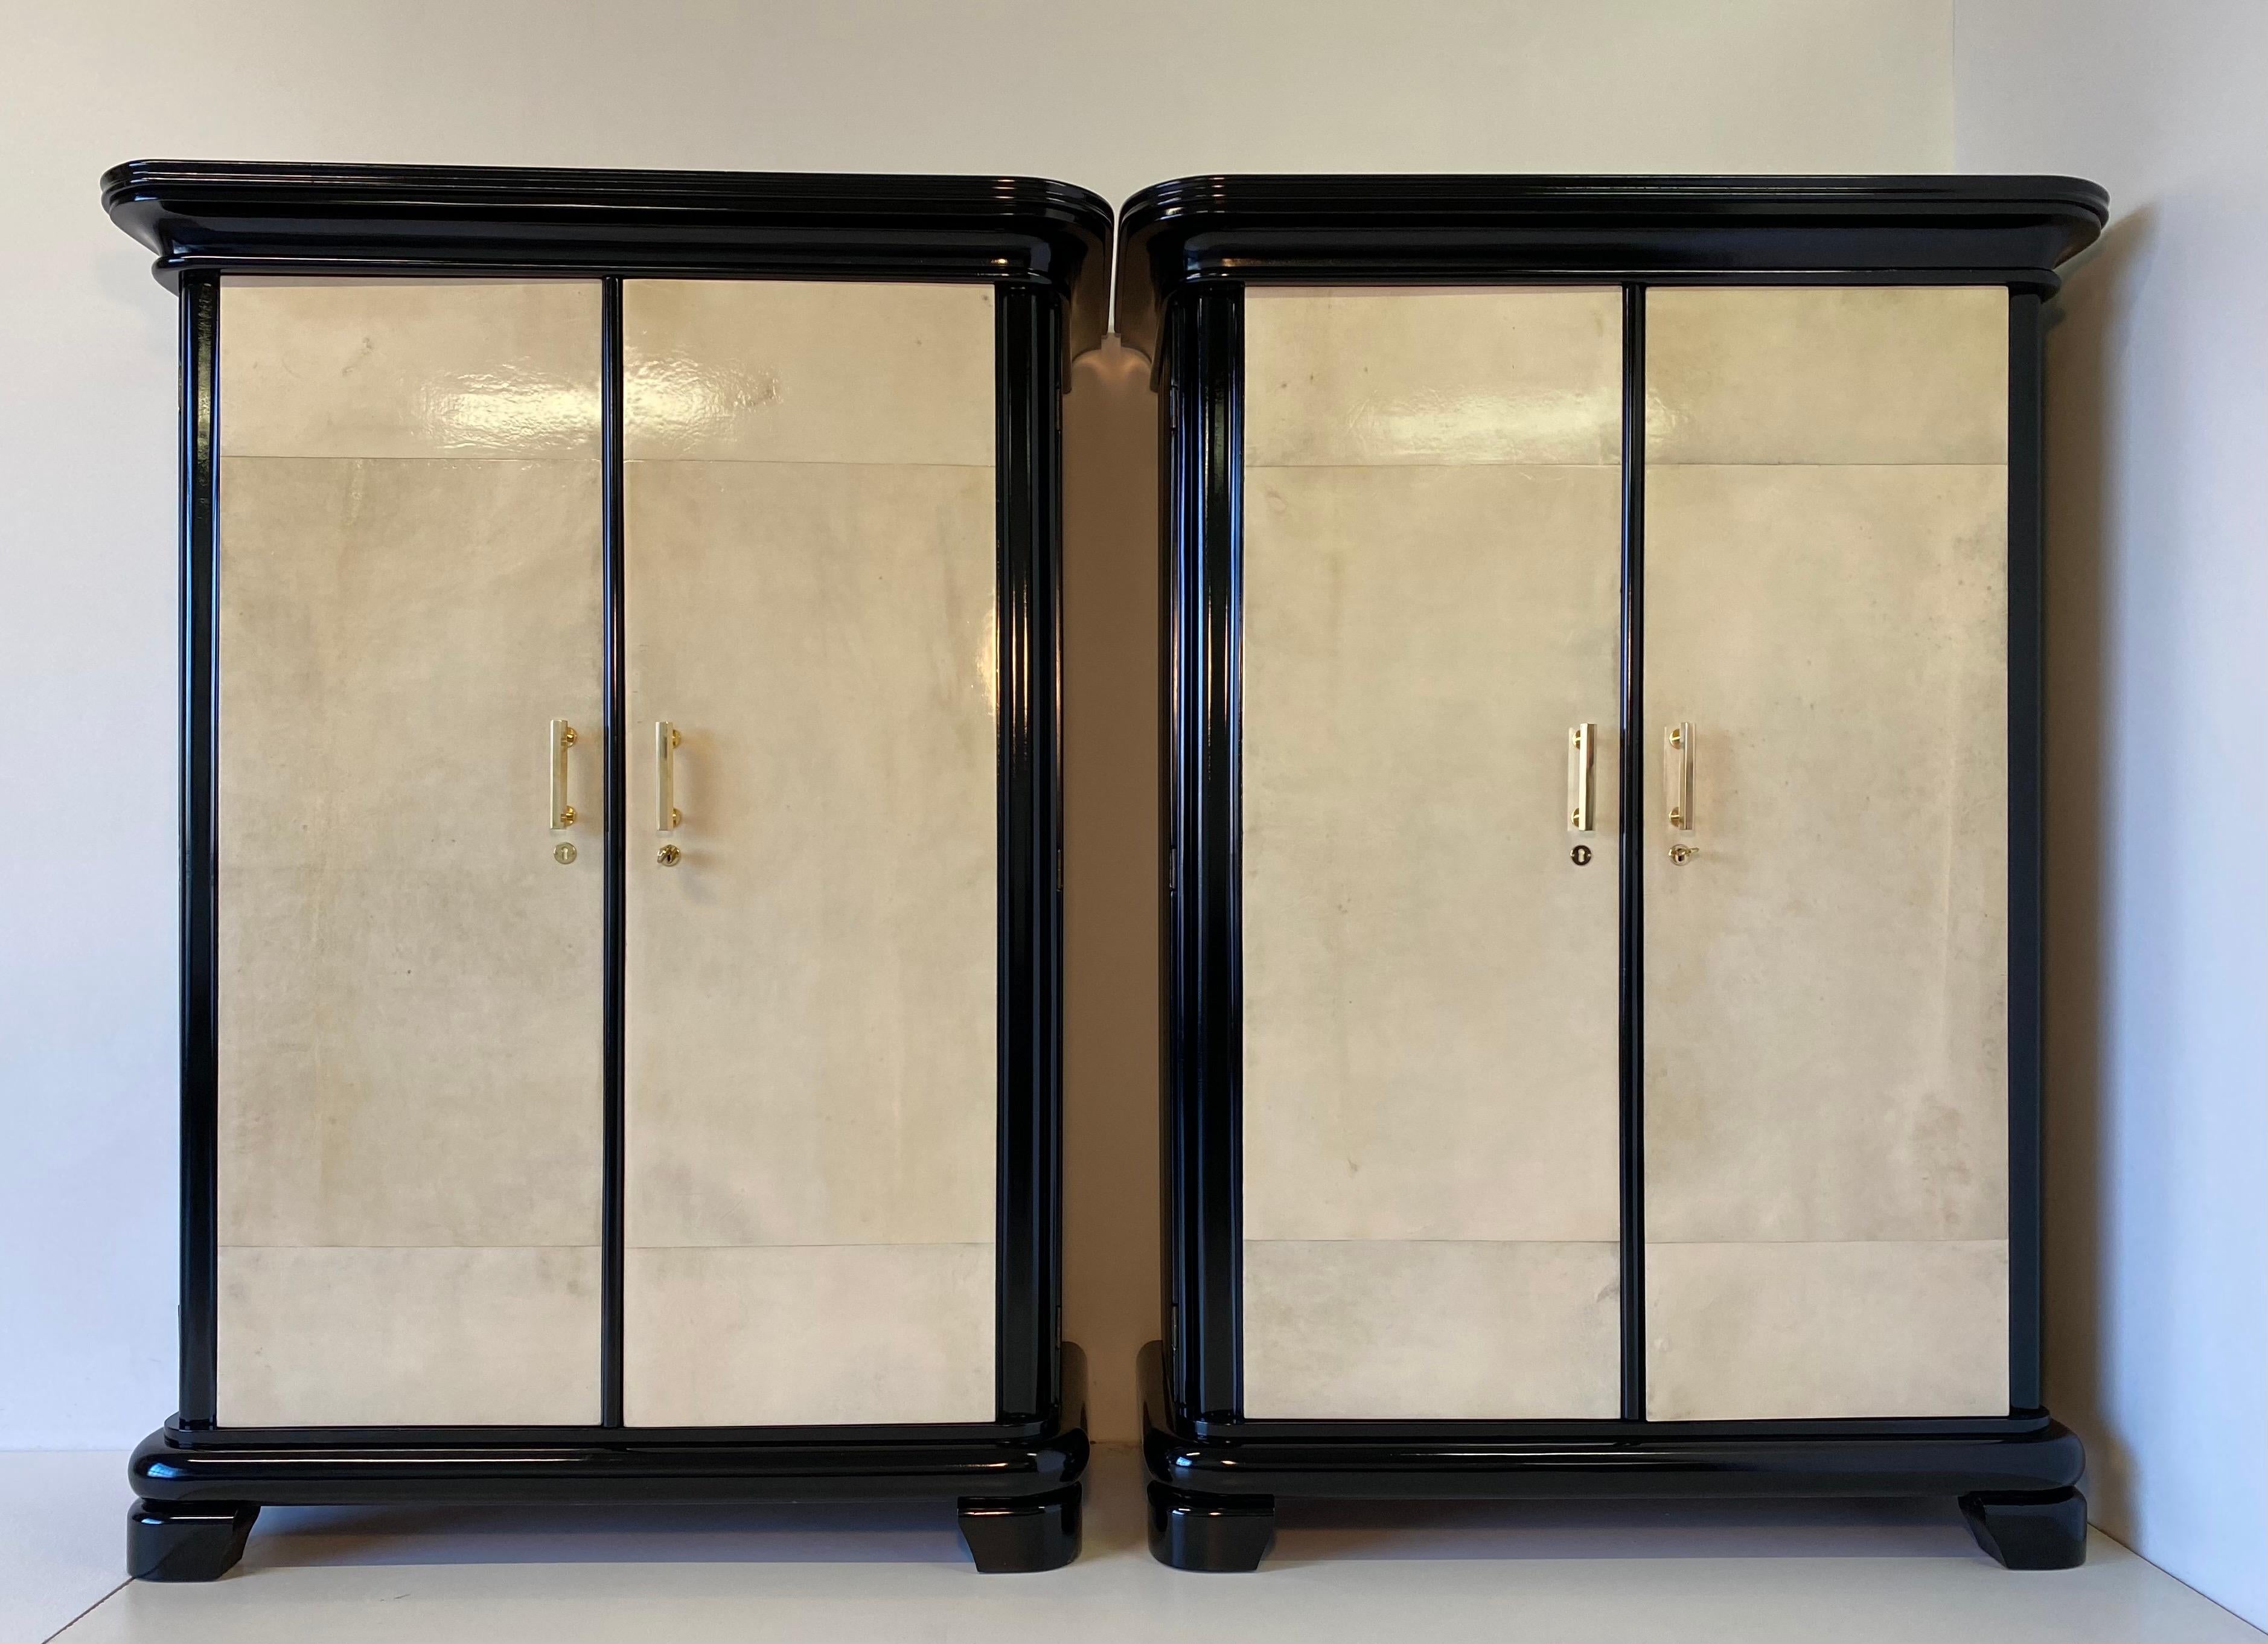 This pair of wardrobes - bookcases was produced in Italy in the 1930s made from solid black wood with the doors covered in fine parchment.
The handles and keys are made of brass, the shelves are finely finished.
Fully restored.